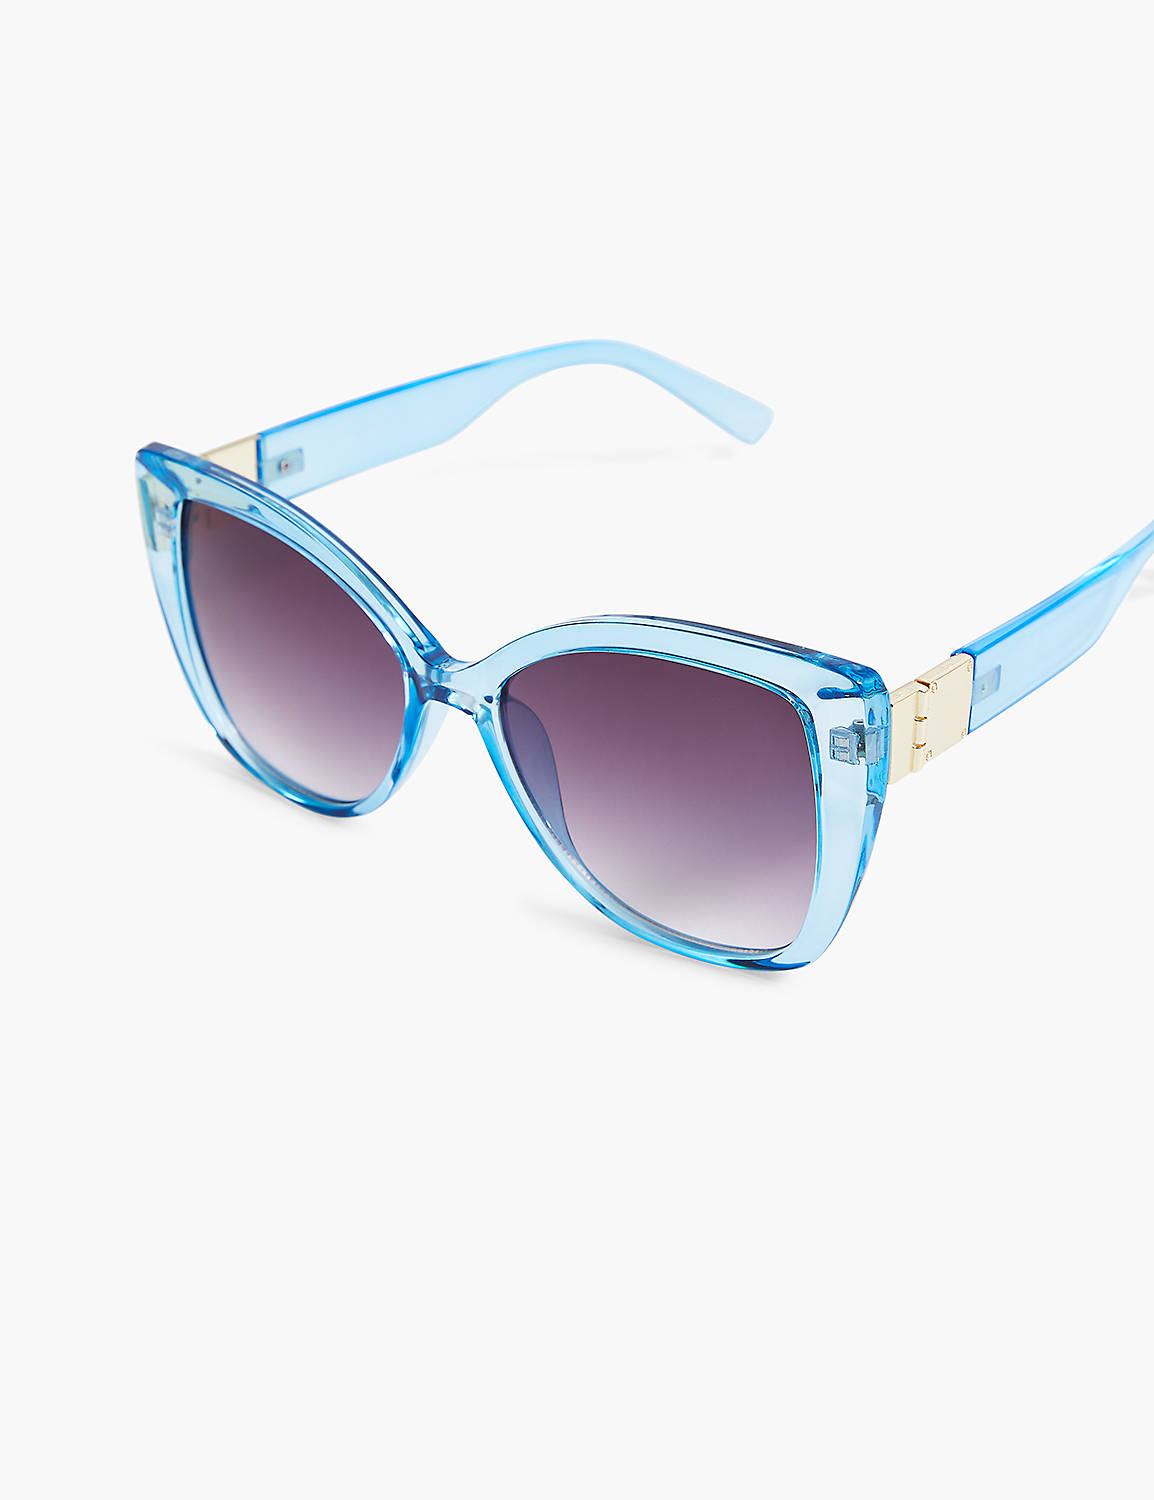 Ethereal Blue Jelly Cat Eye Sunglas Product Image 1